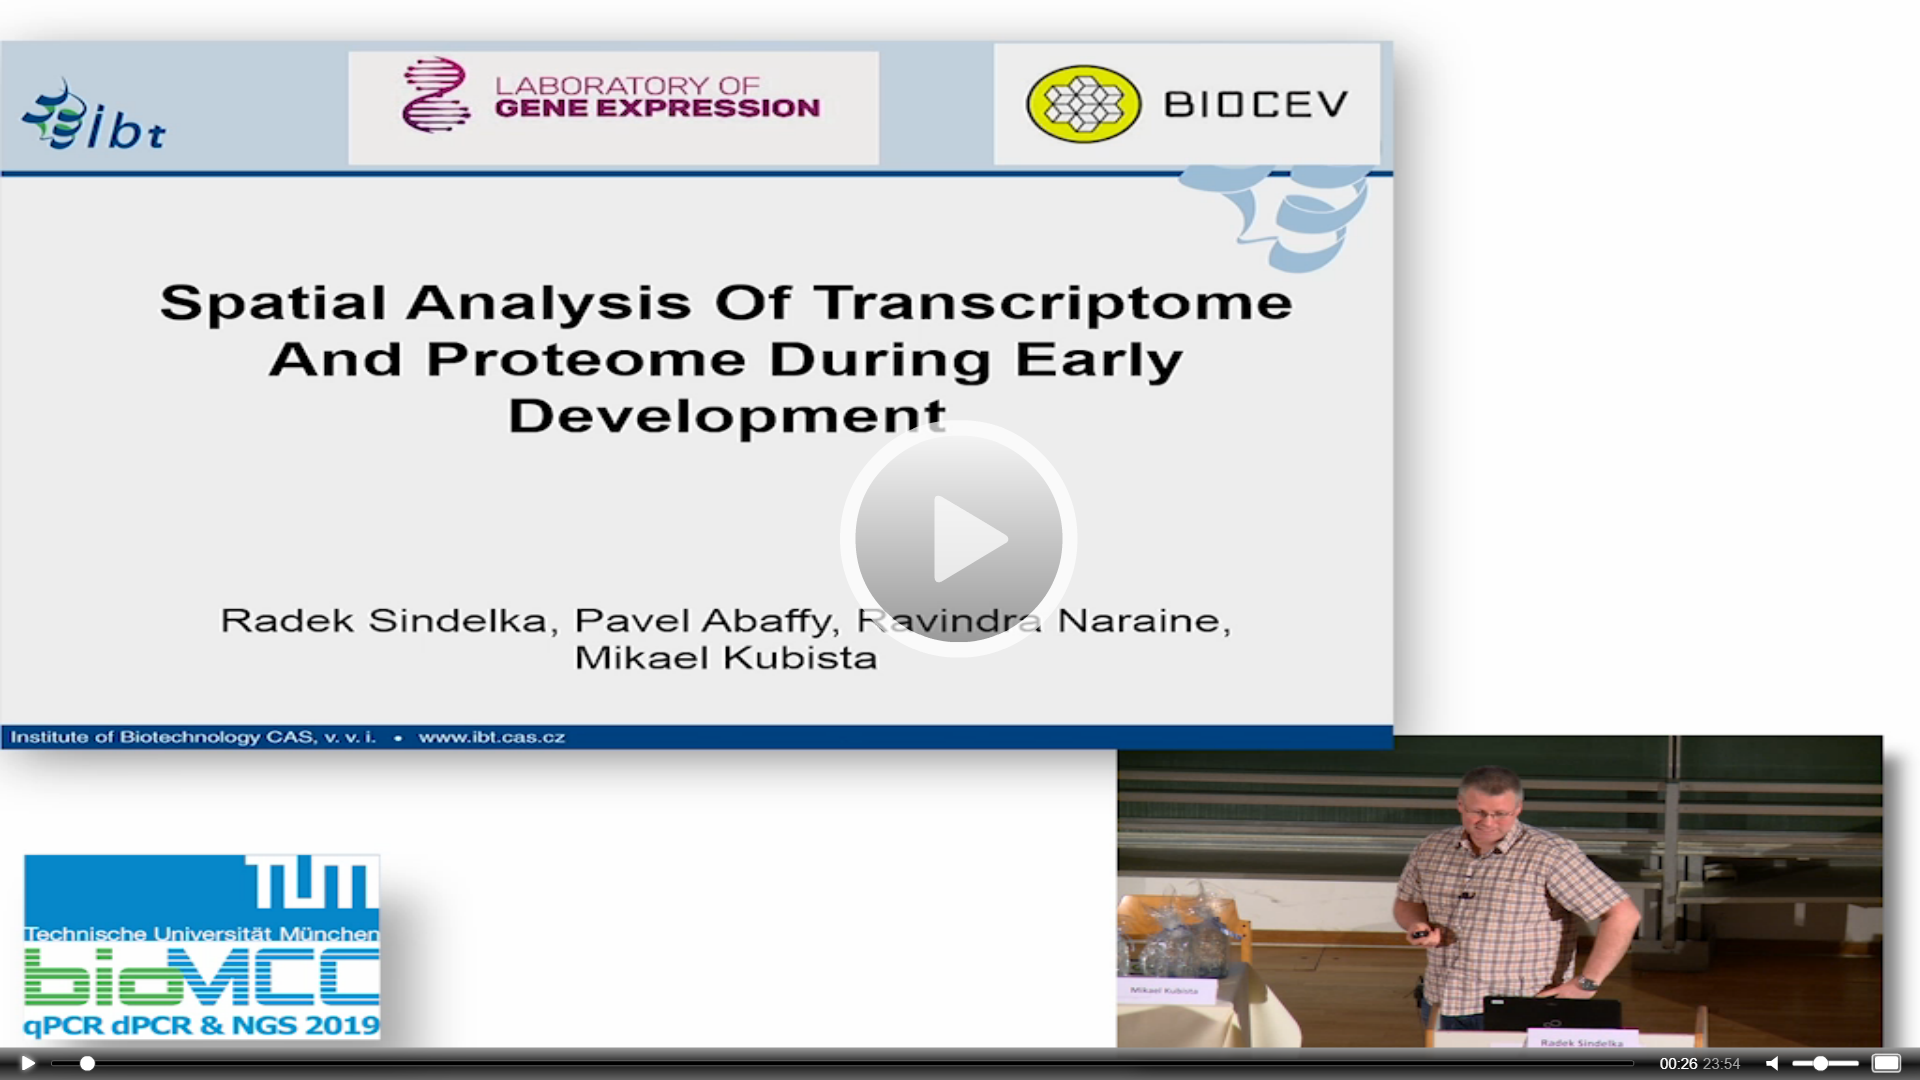 Spatial Analysis Of Transcriptome And Proteome During Early Development